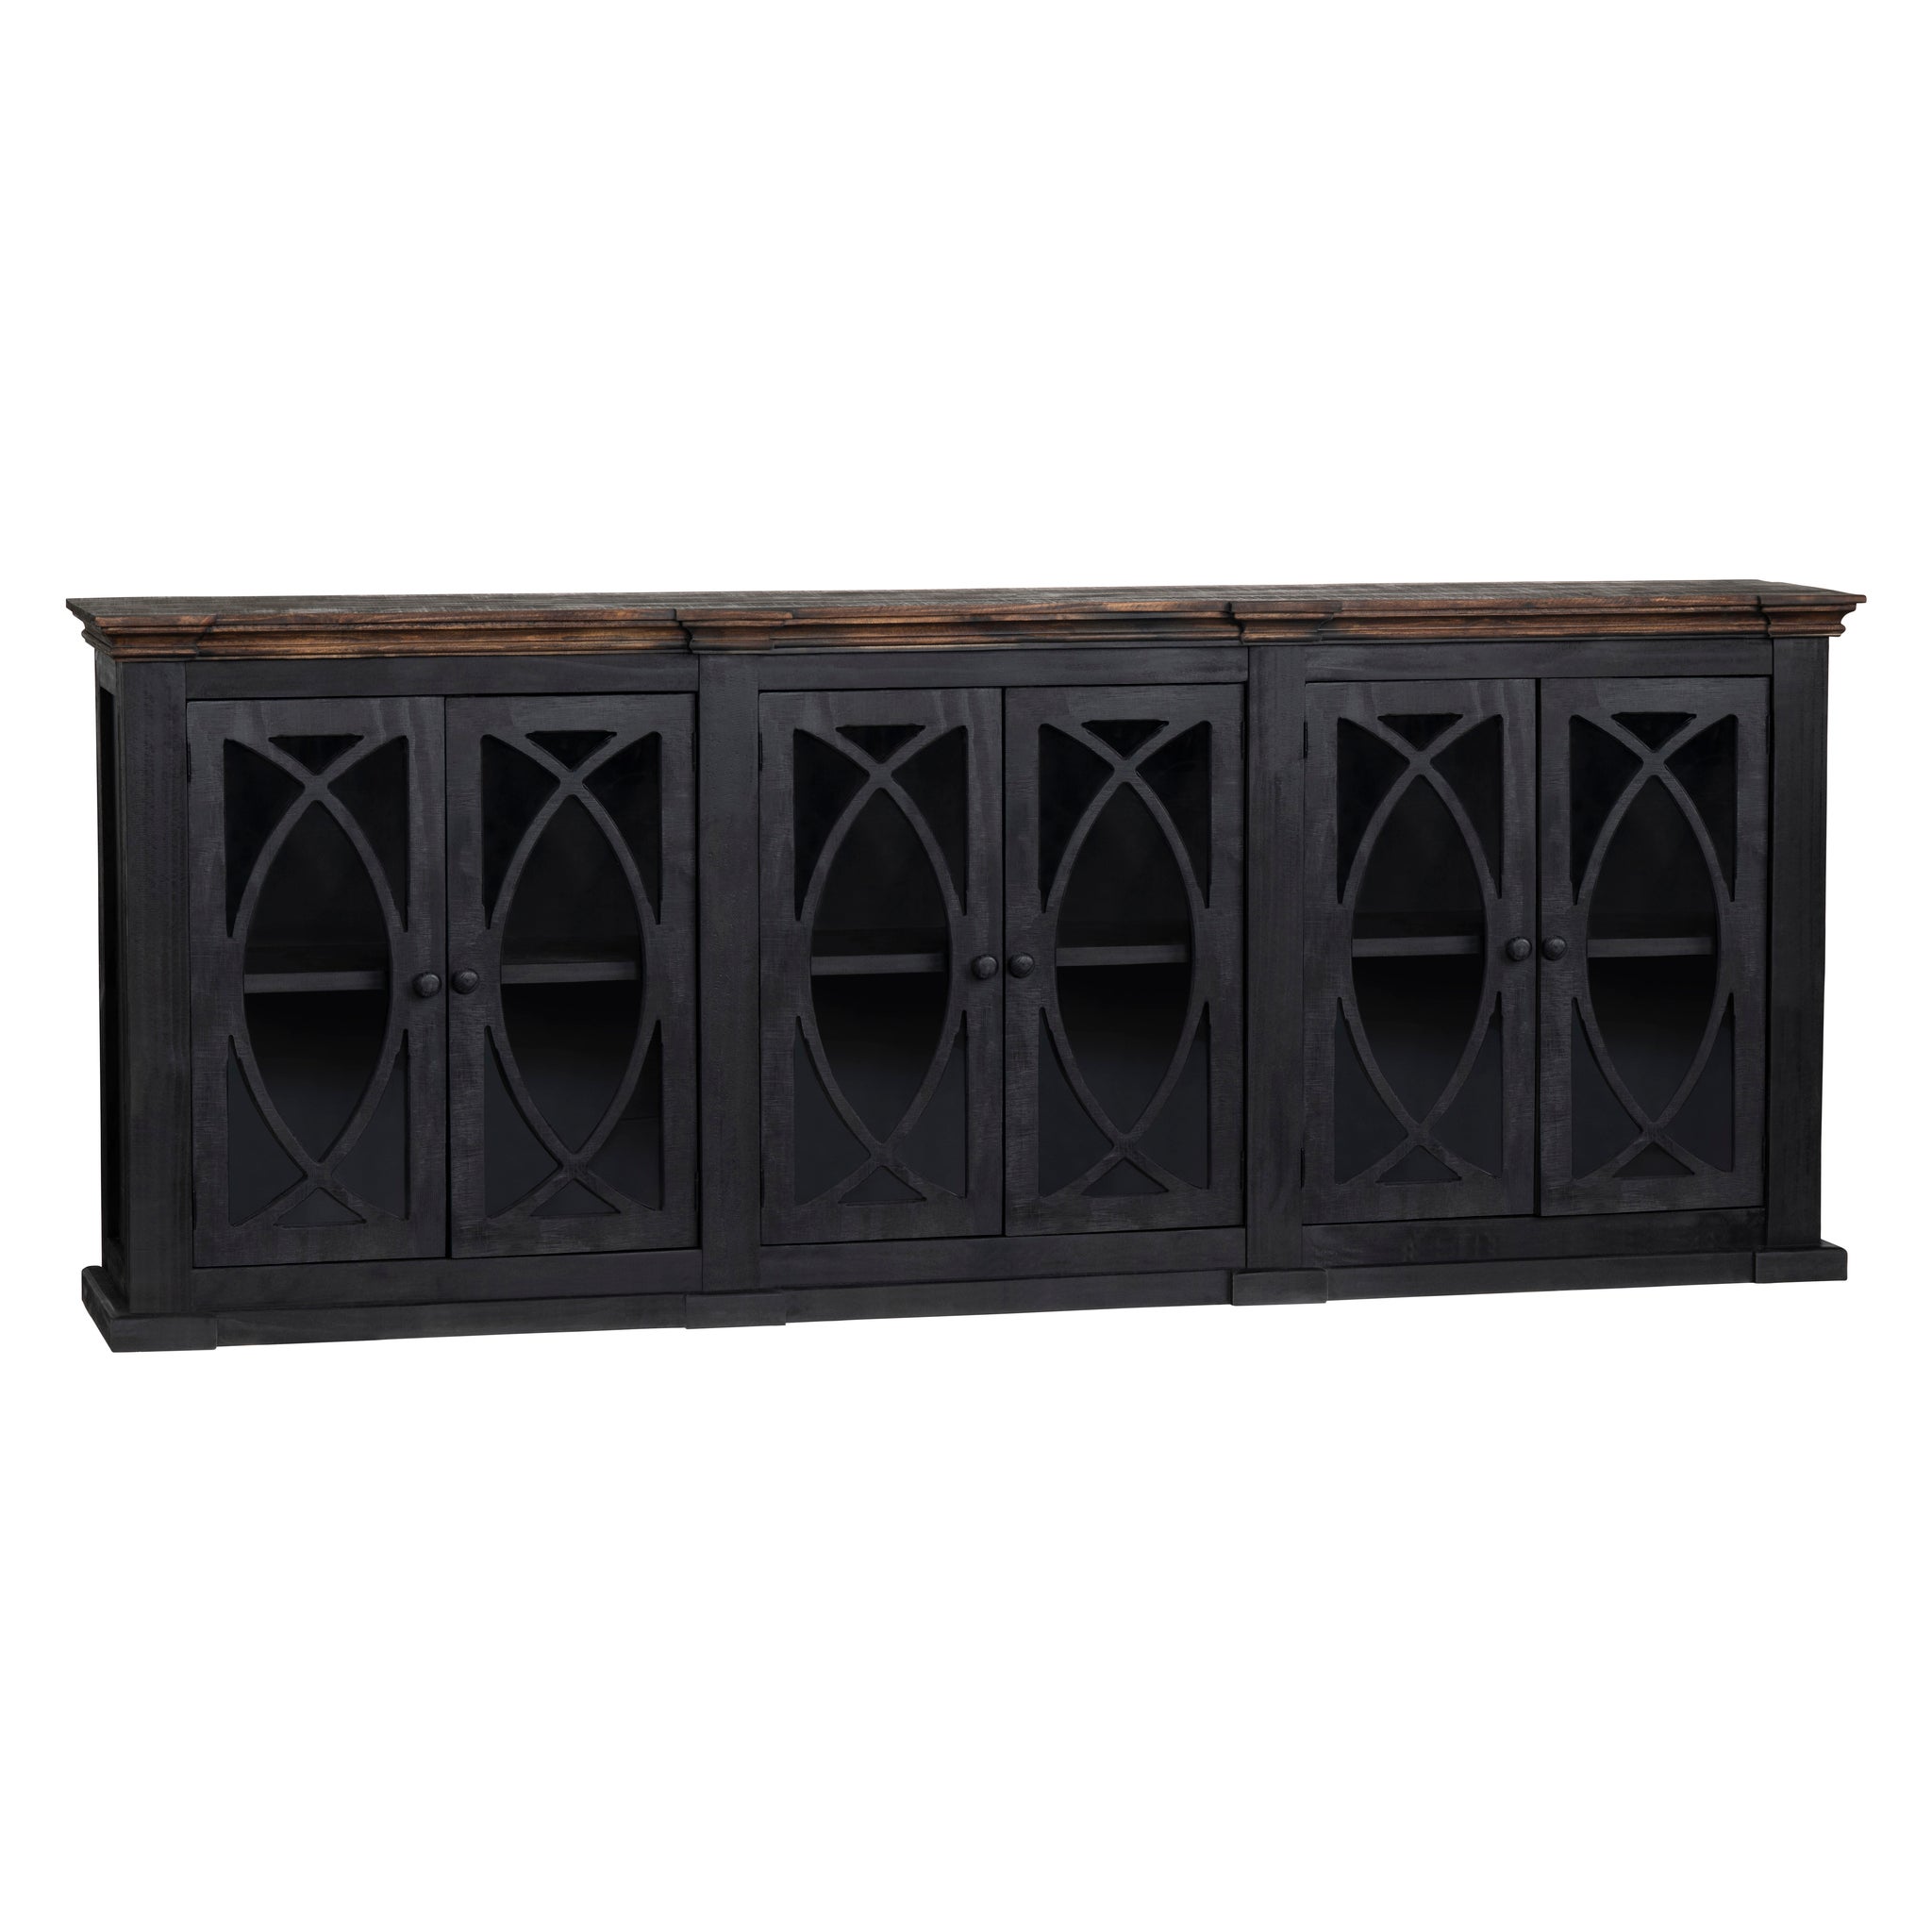 Furniture - Accents - Rustic - Crestview Collection